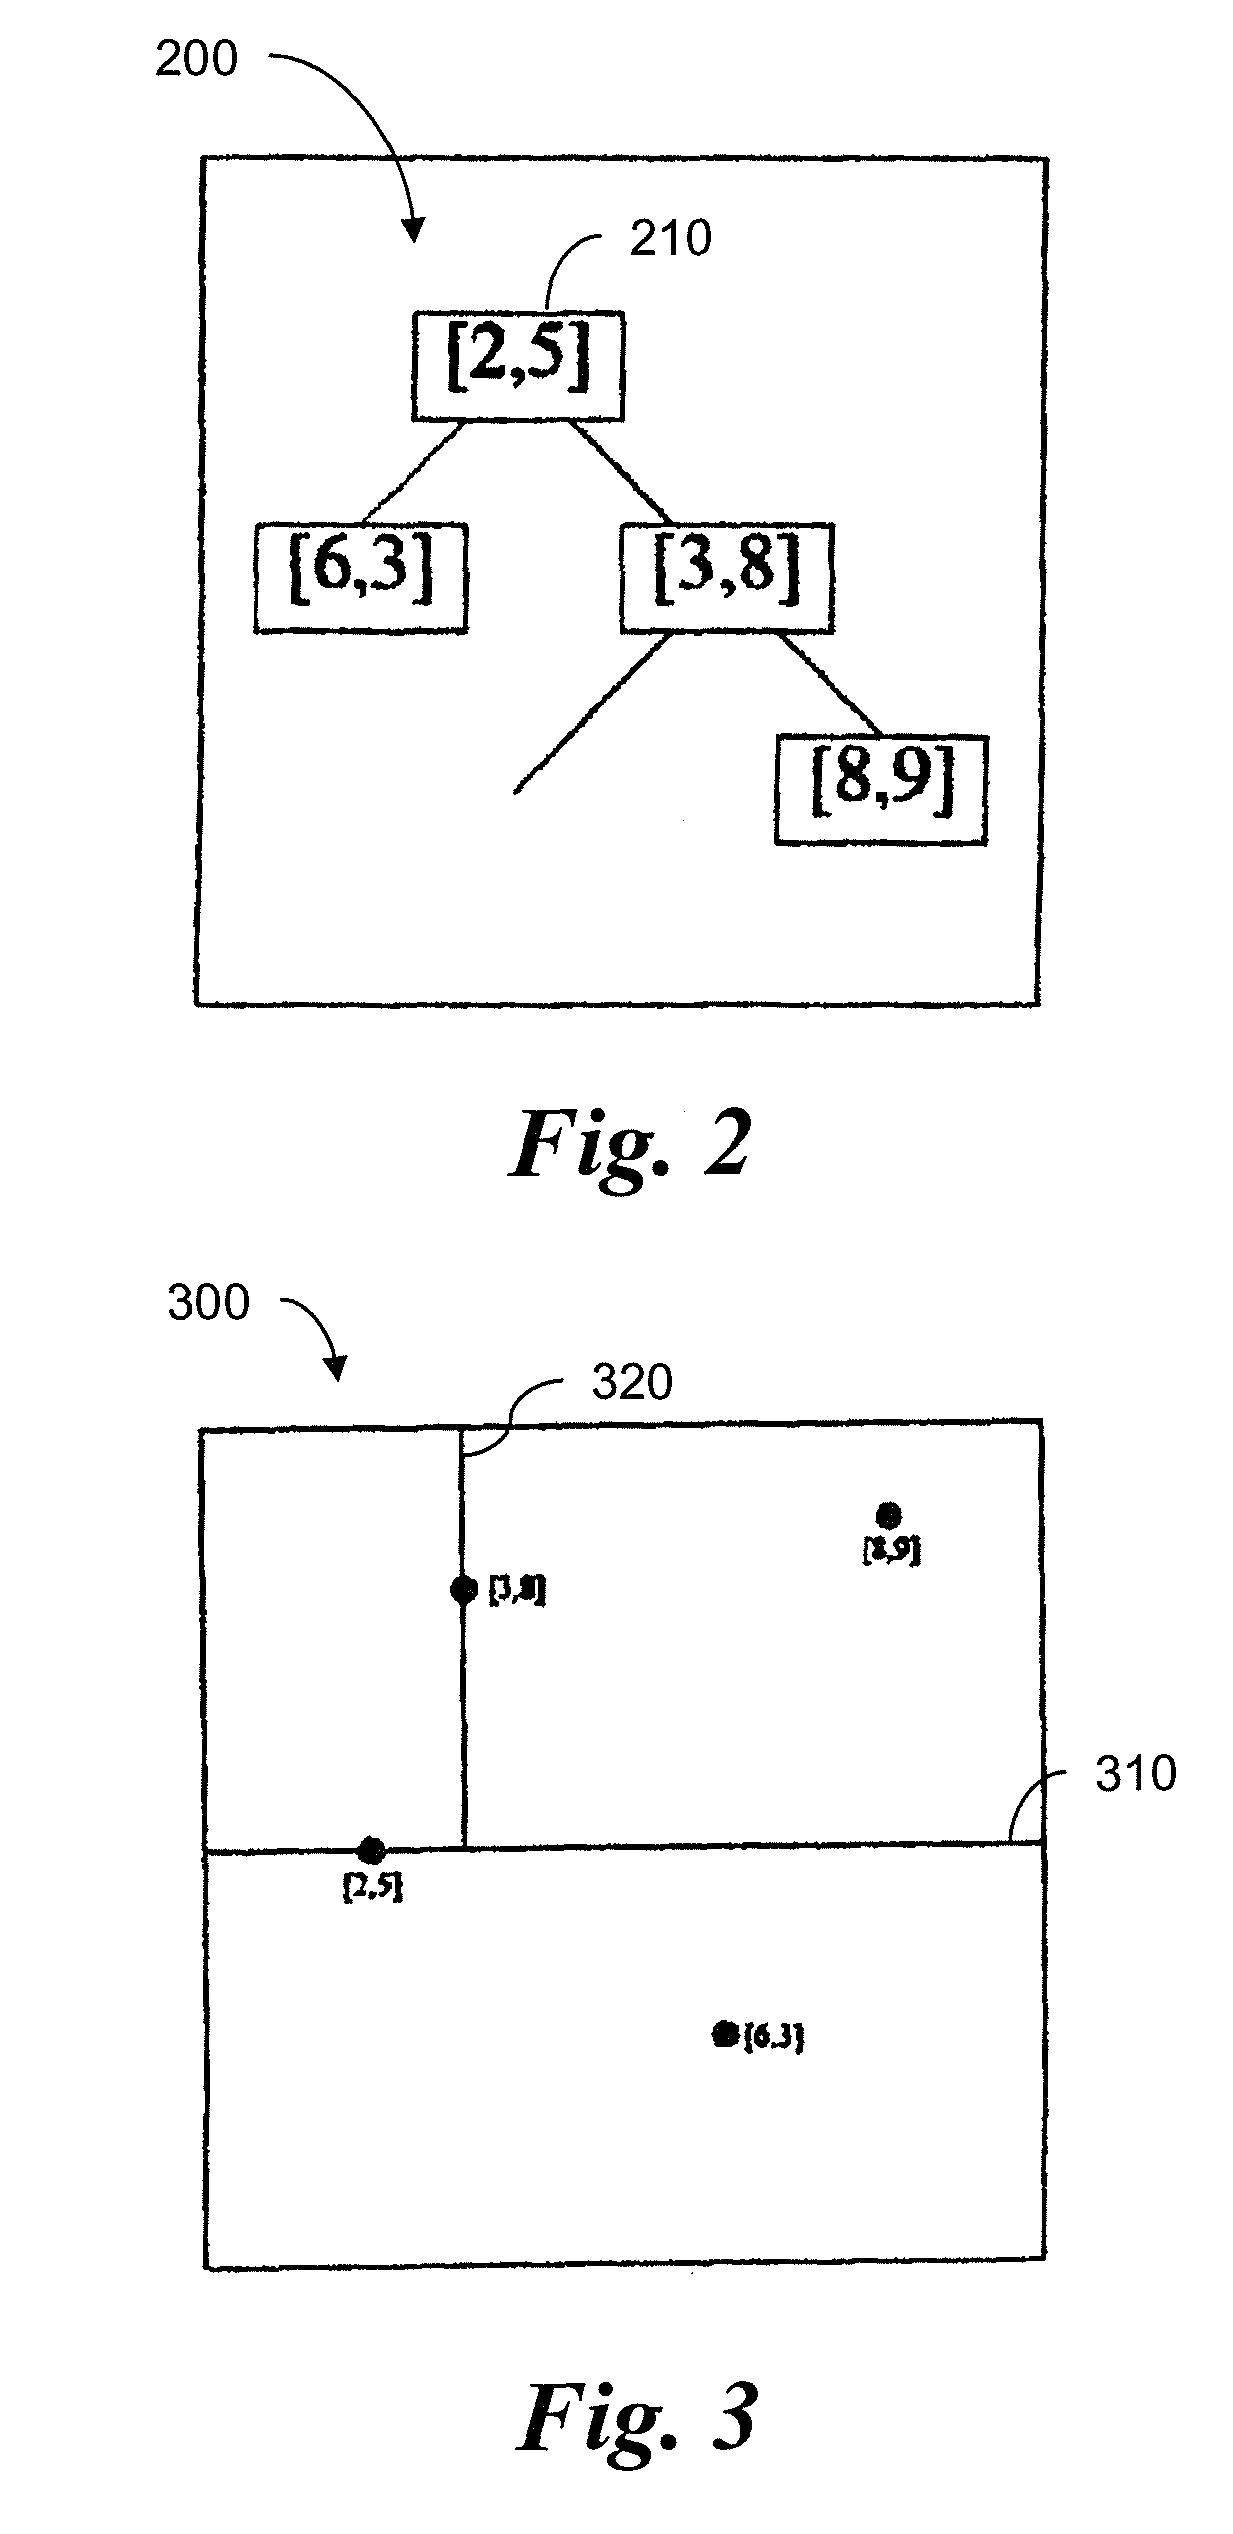 Use of sequential nearest neighbor clustering for instance selection in machine condition monitoring